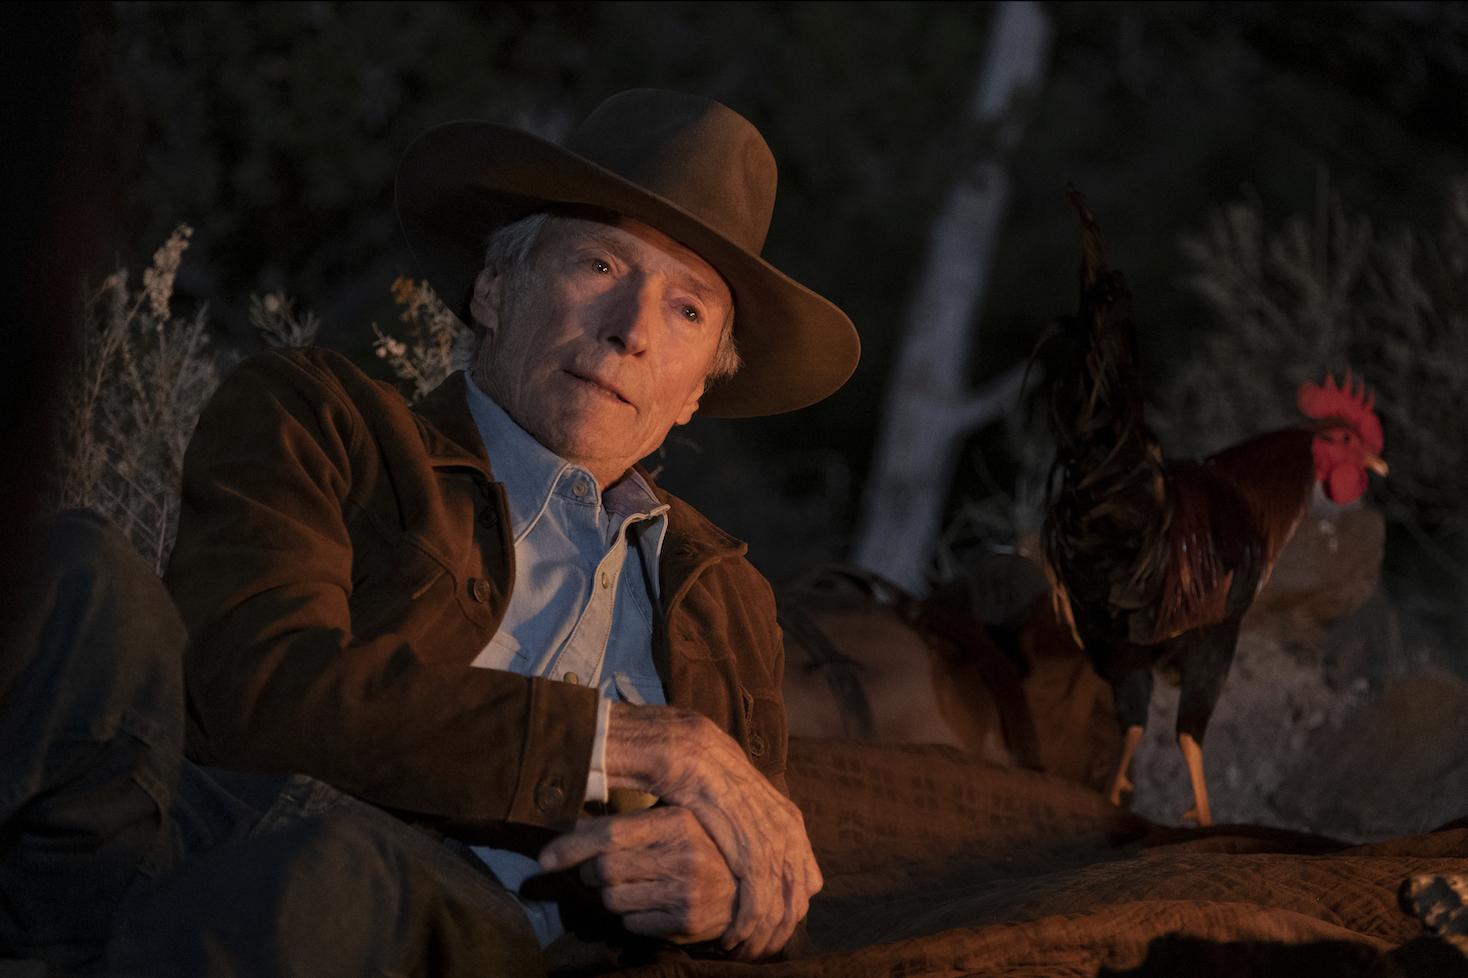 Trailer for Clint Eastwood's 'Cry Macho' Released